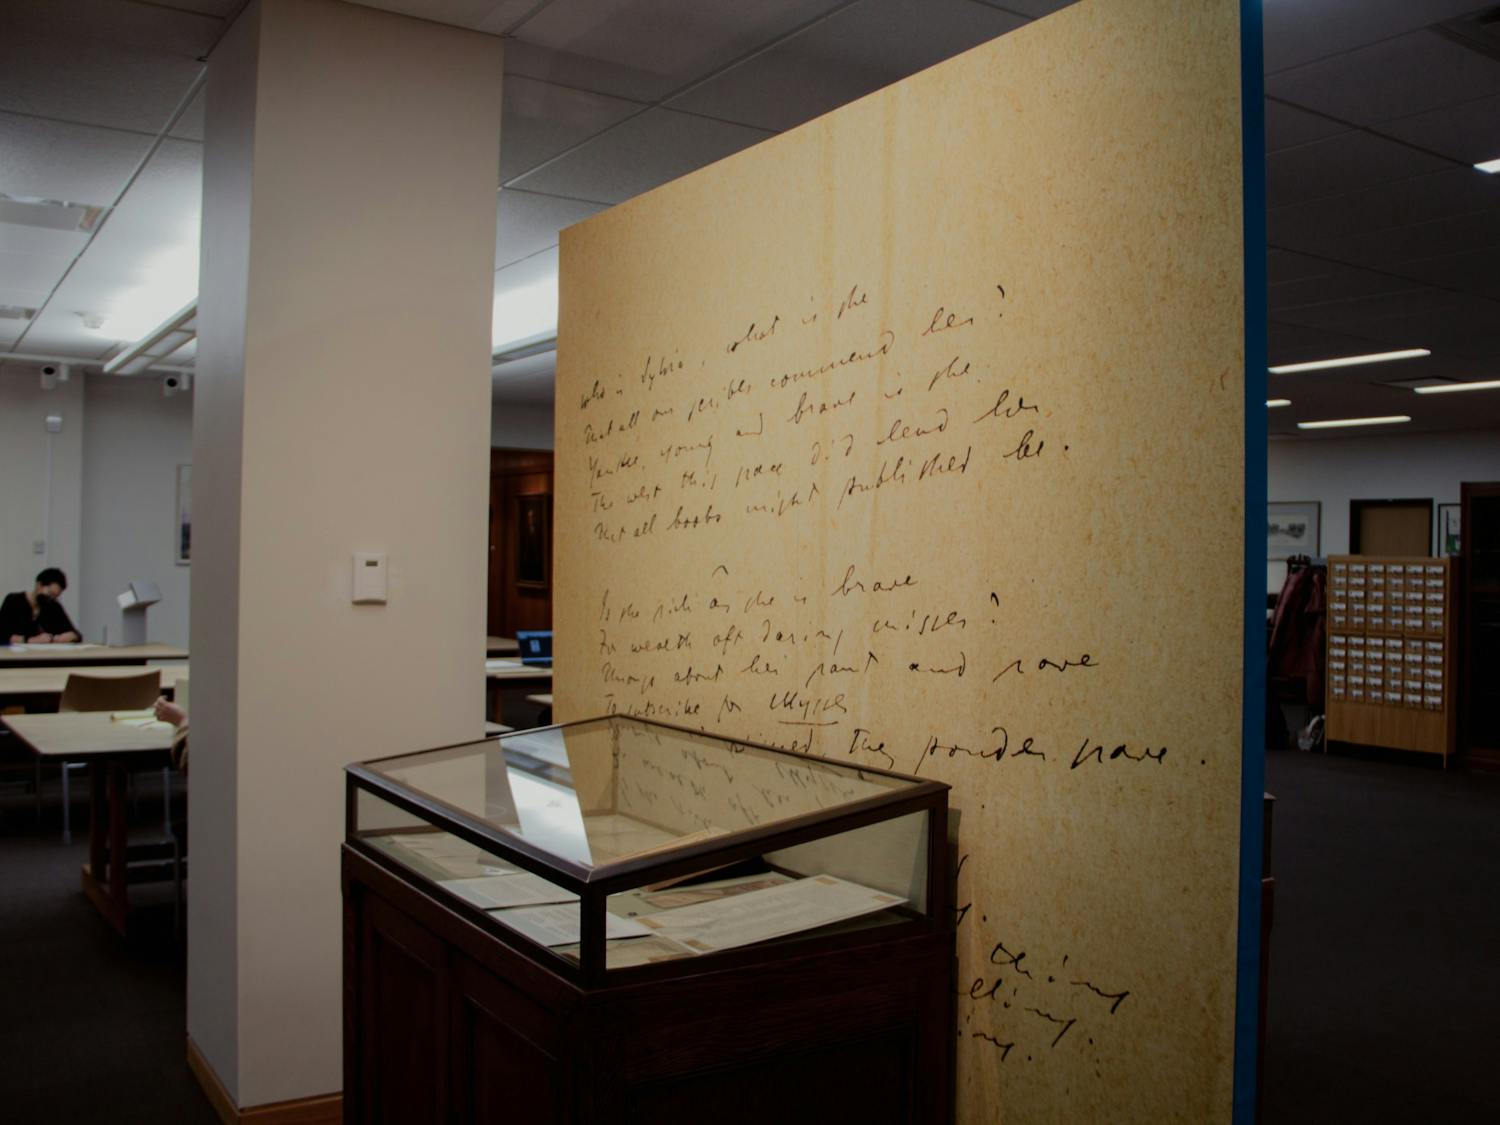 The “Pirating Ulysses” display in Special Collections includes seven items relating to Samuel Roth’s unauthorized publication of Ulysses.